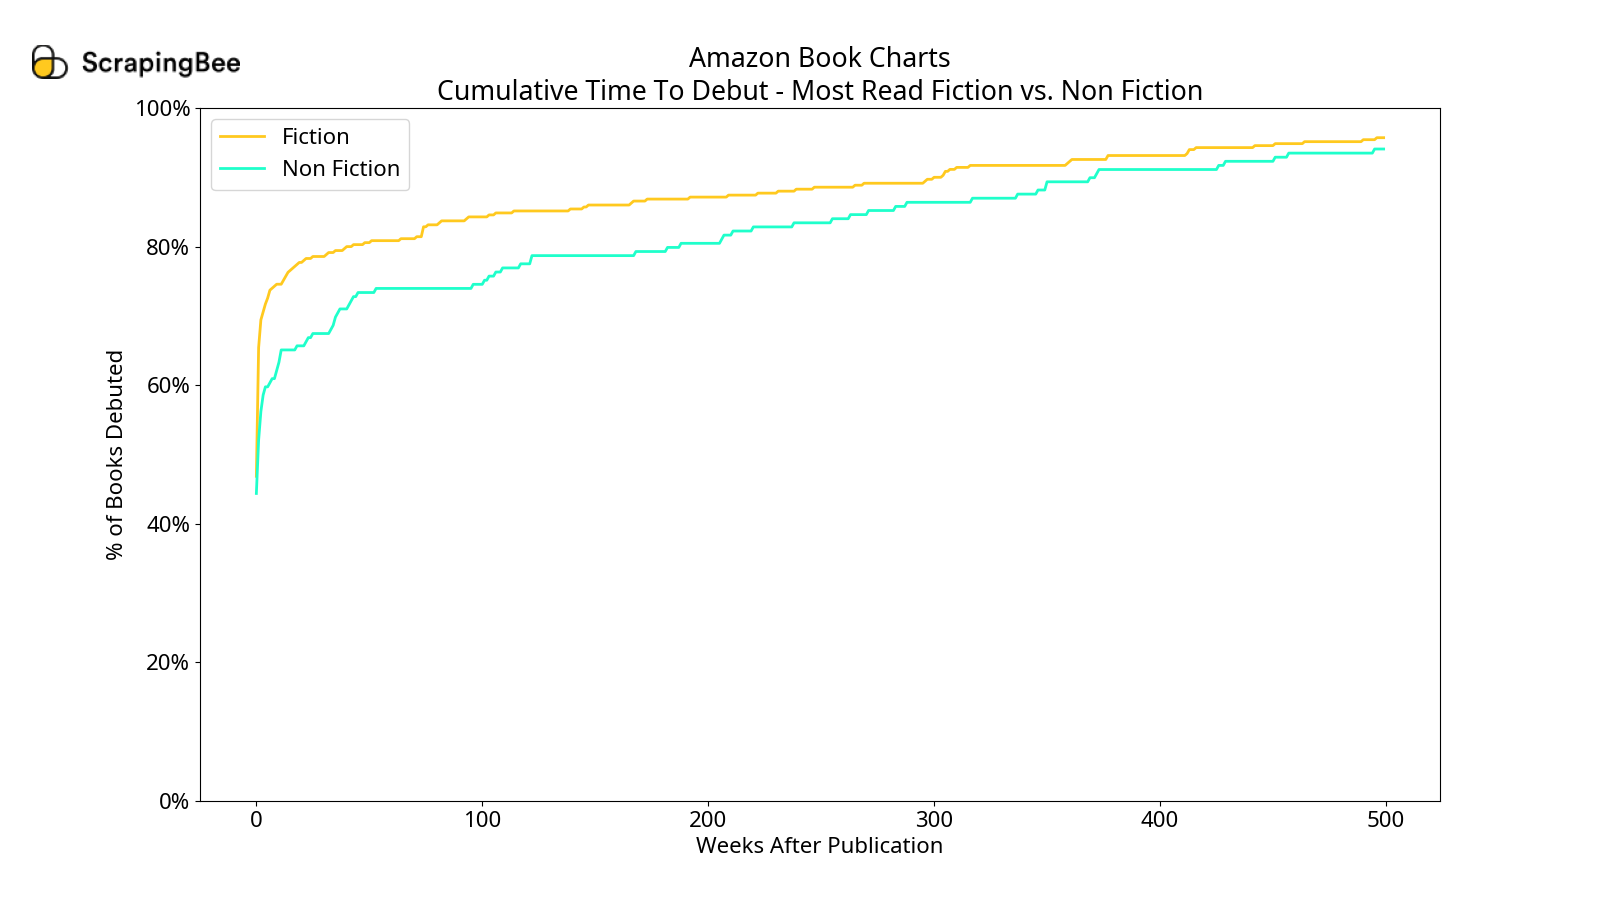 Time to Debut Most Read Fiction vs. Non Fiction